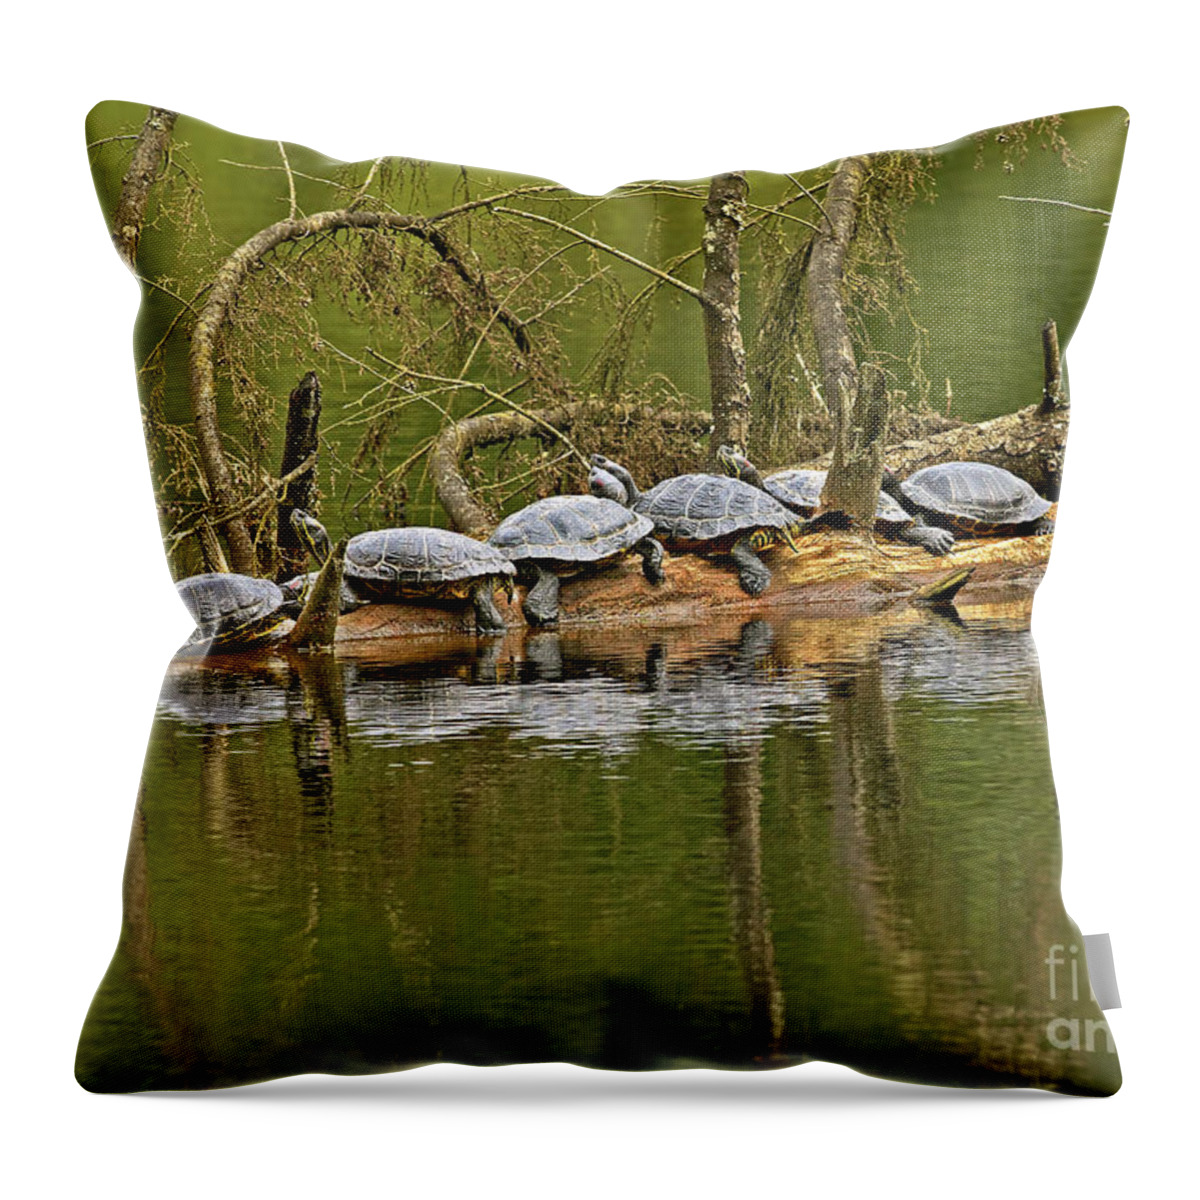 Red-eared Slider Turtles Throw Pillow featuring the photograph Red Eared Slider Turtles 2 by Sharon Talson